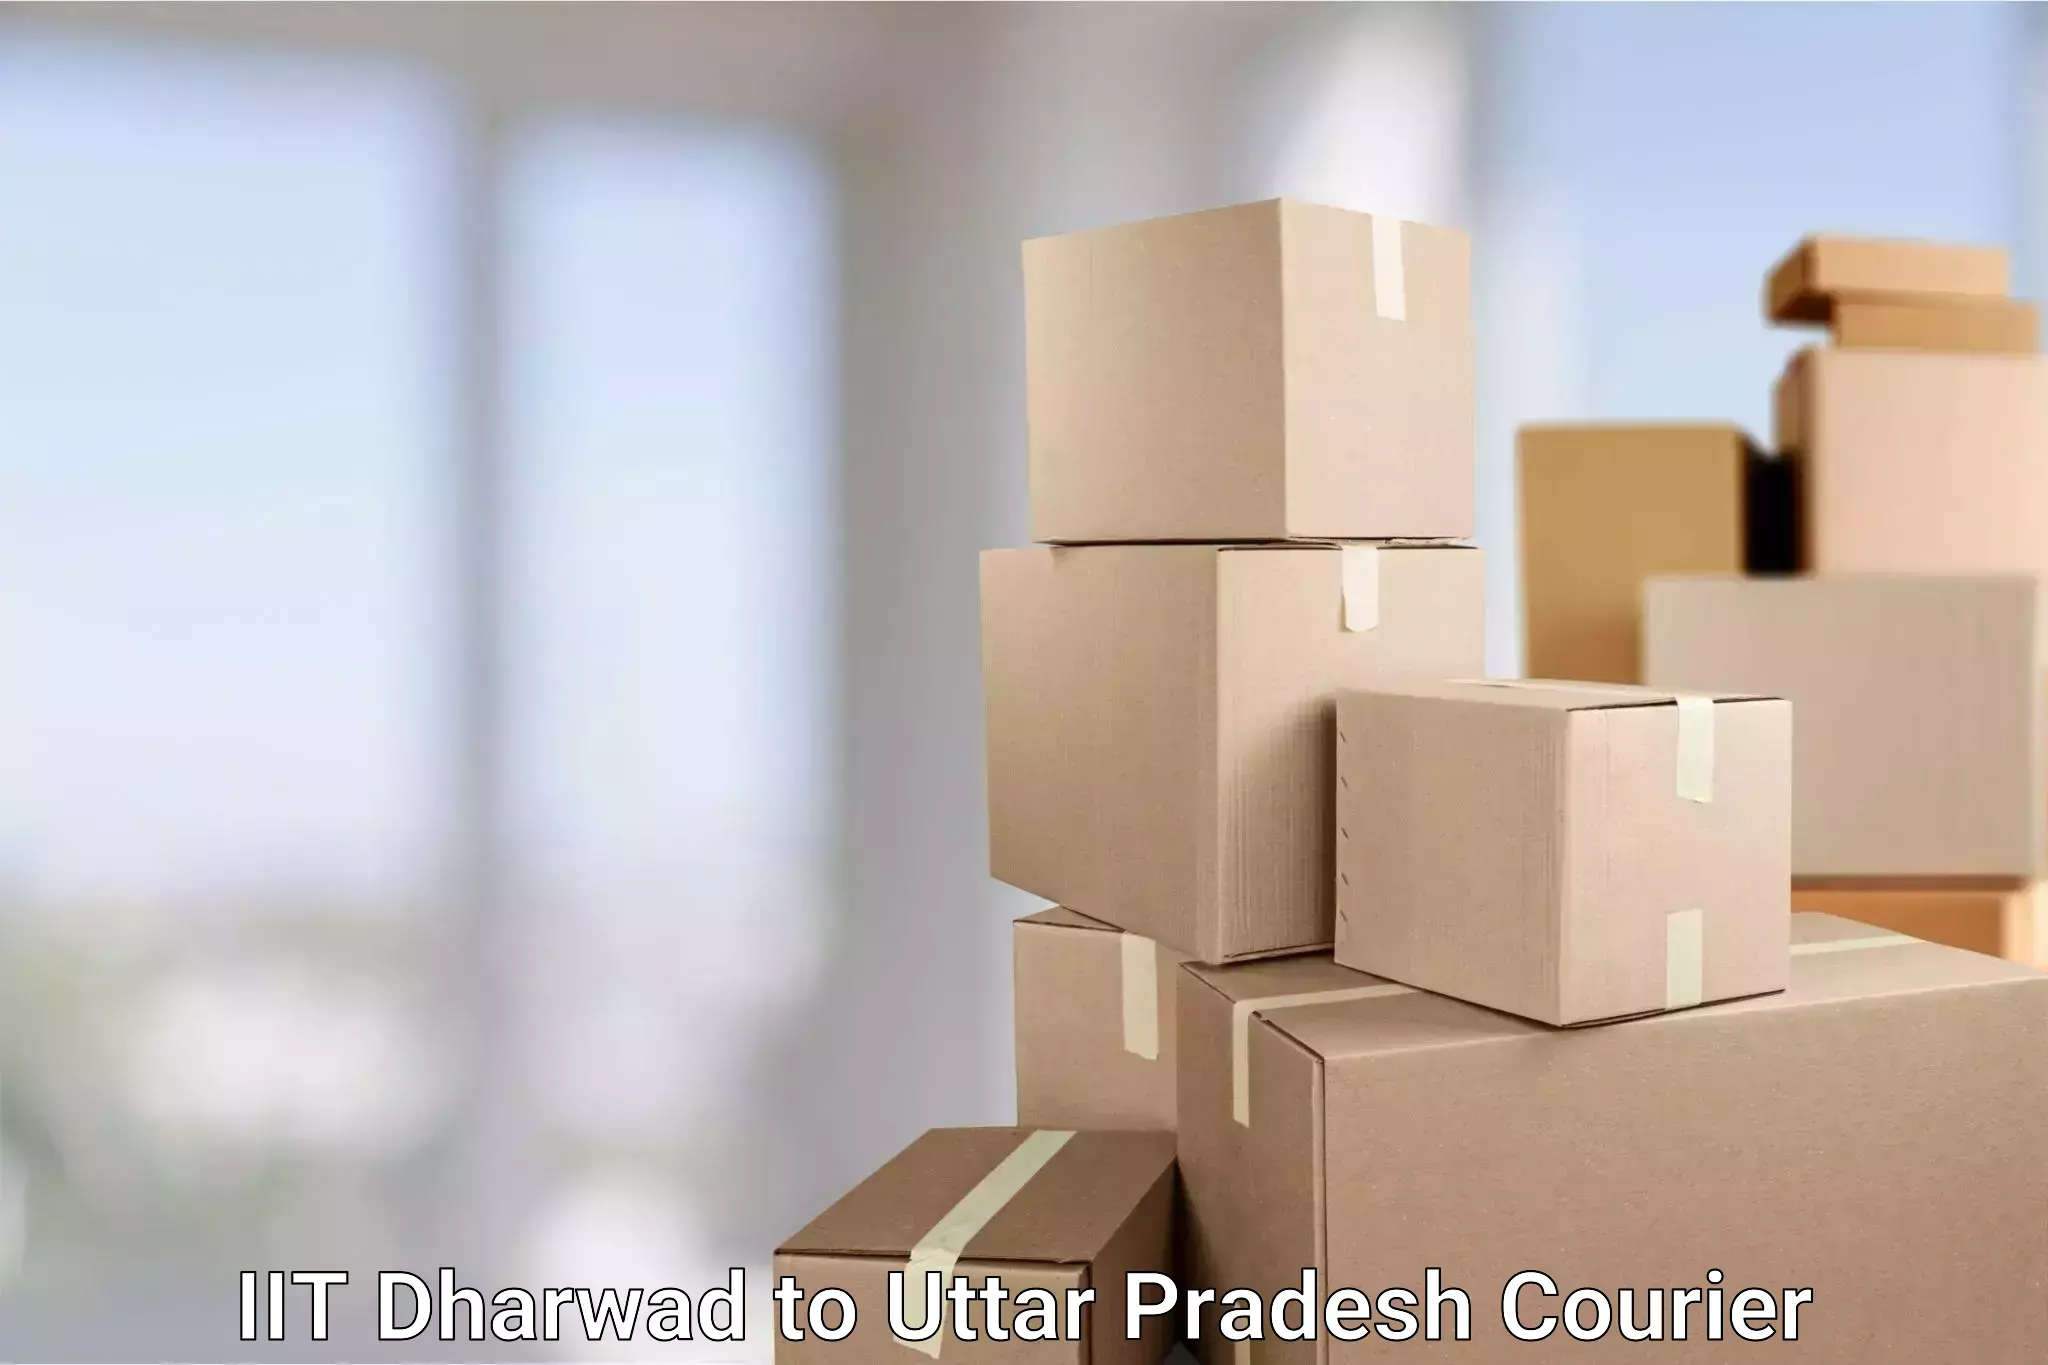 State-of-the-art courier technology IIT Dharwad to Allahabad